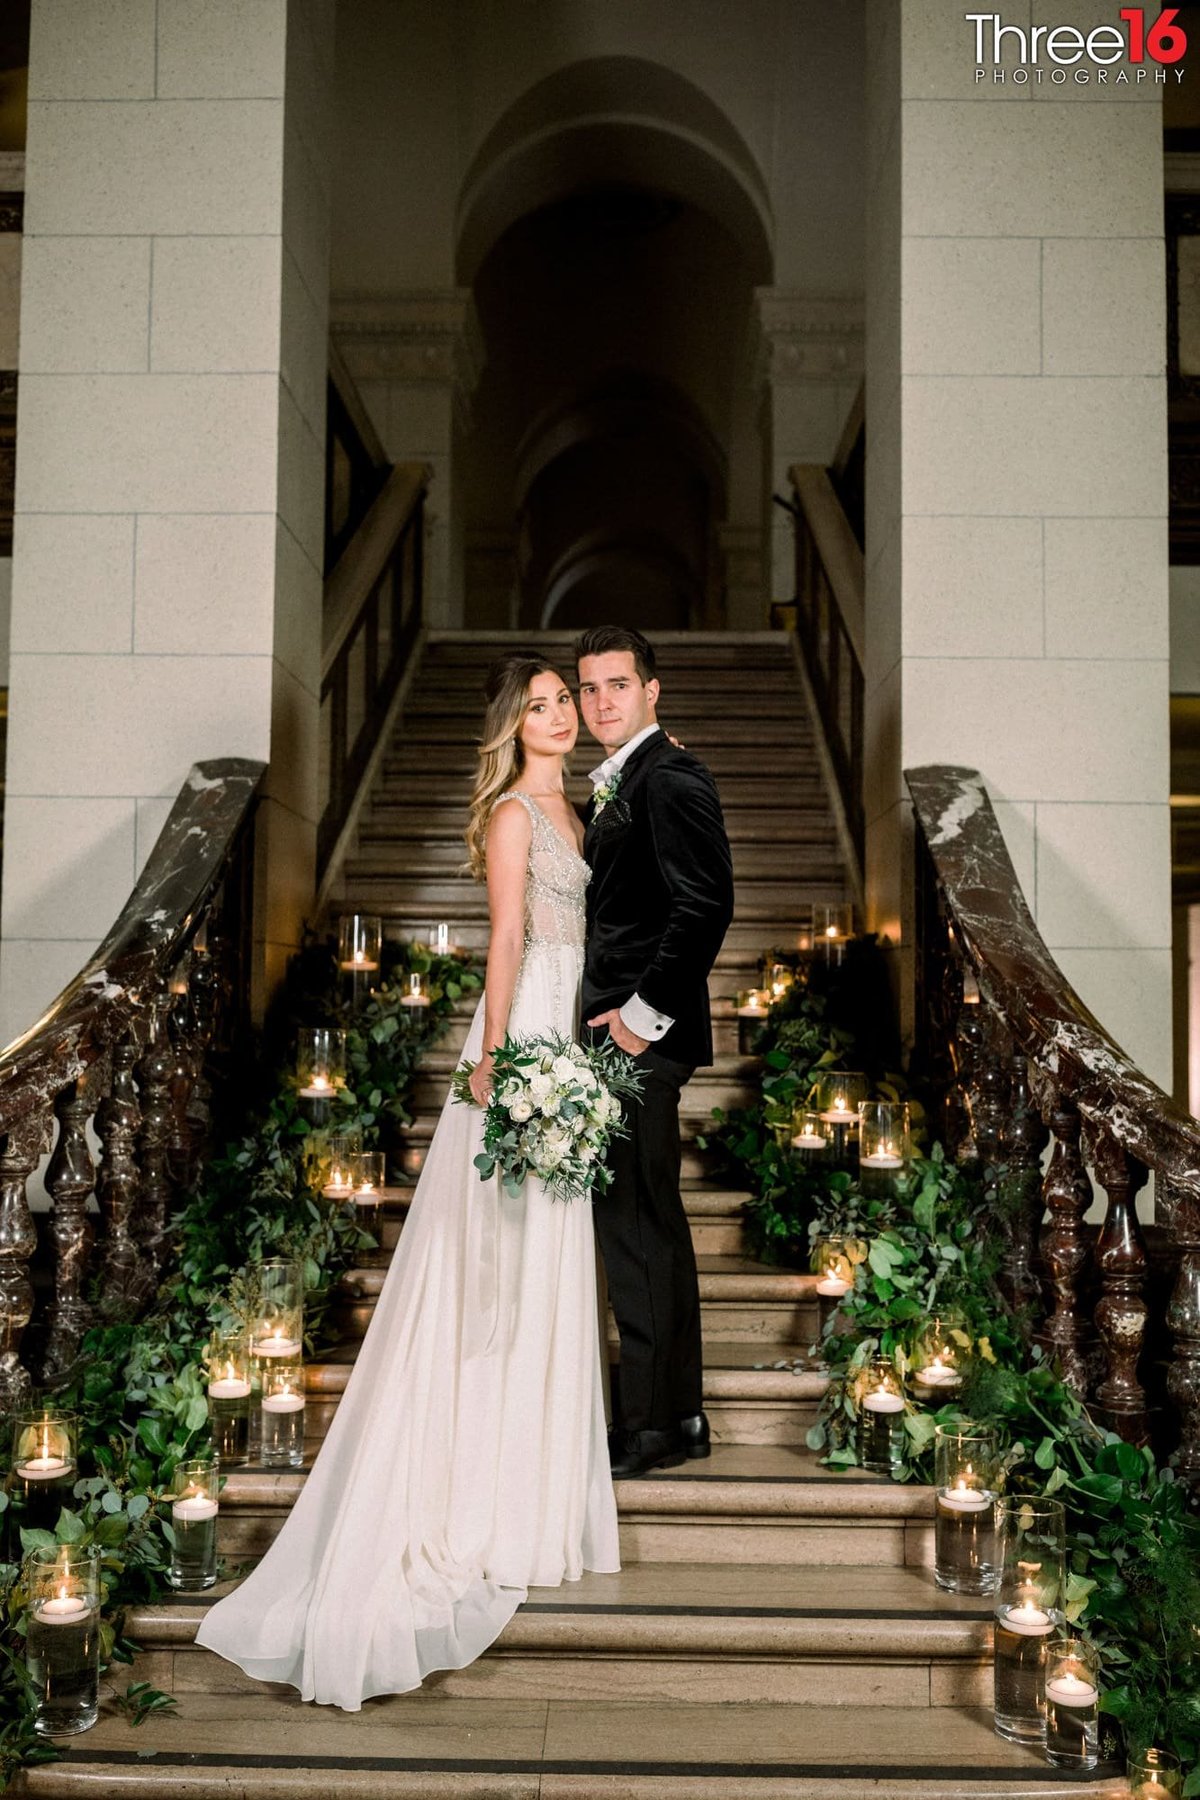 Bride and Groom pose together on the stairs highlighted by candles and plants